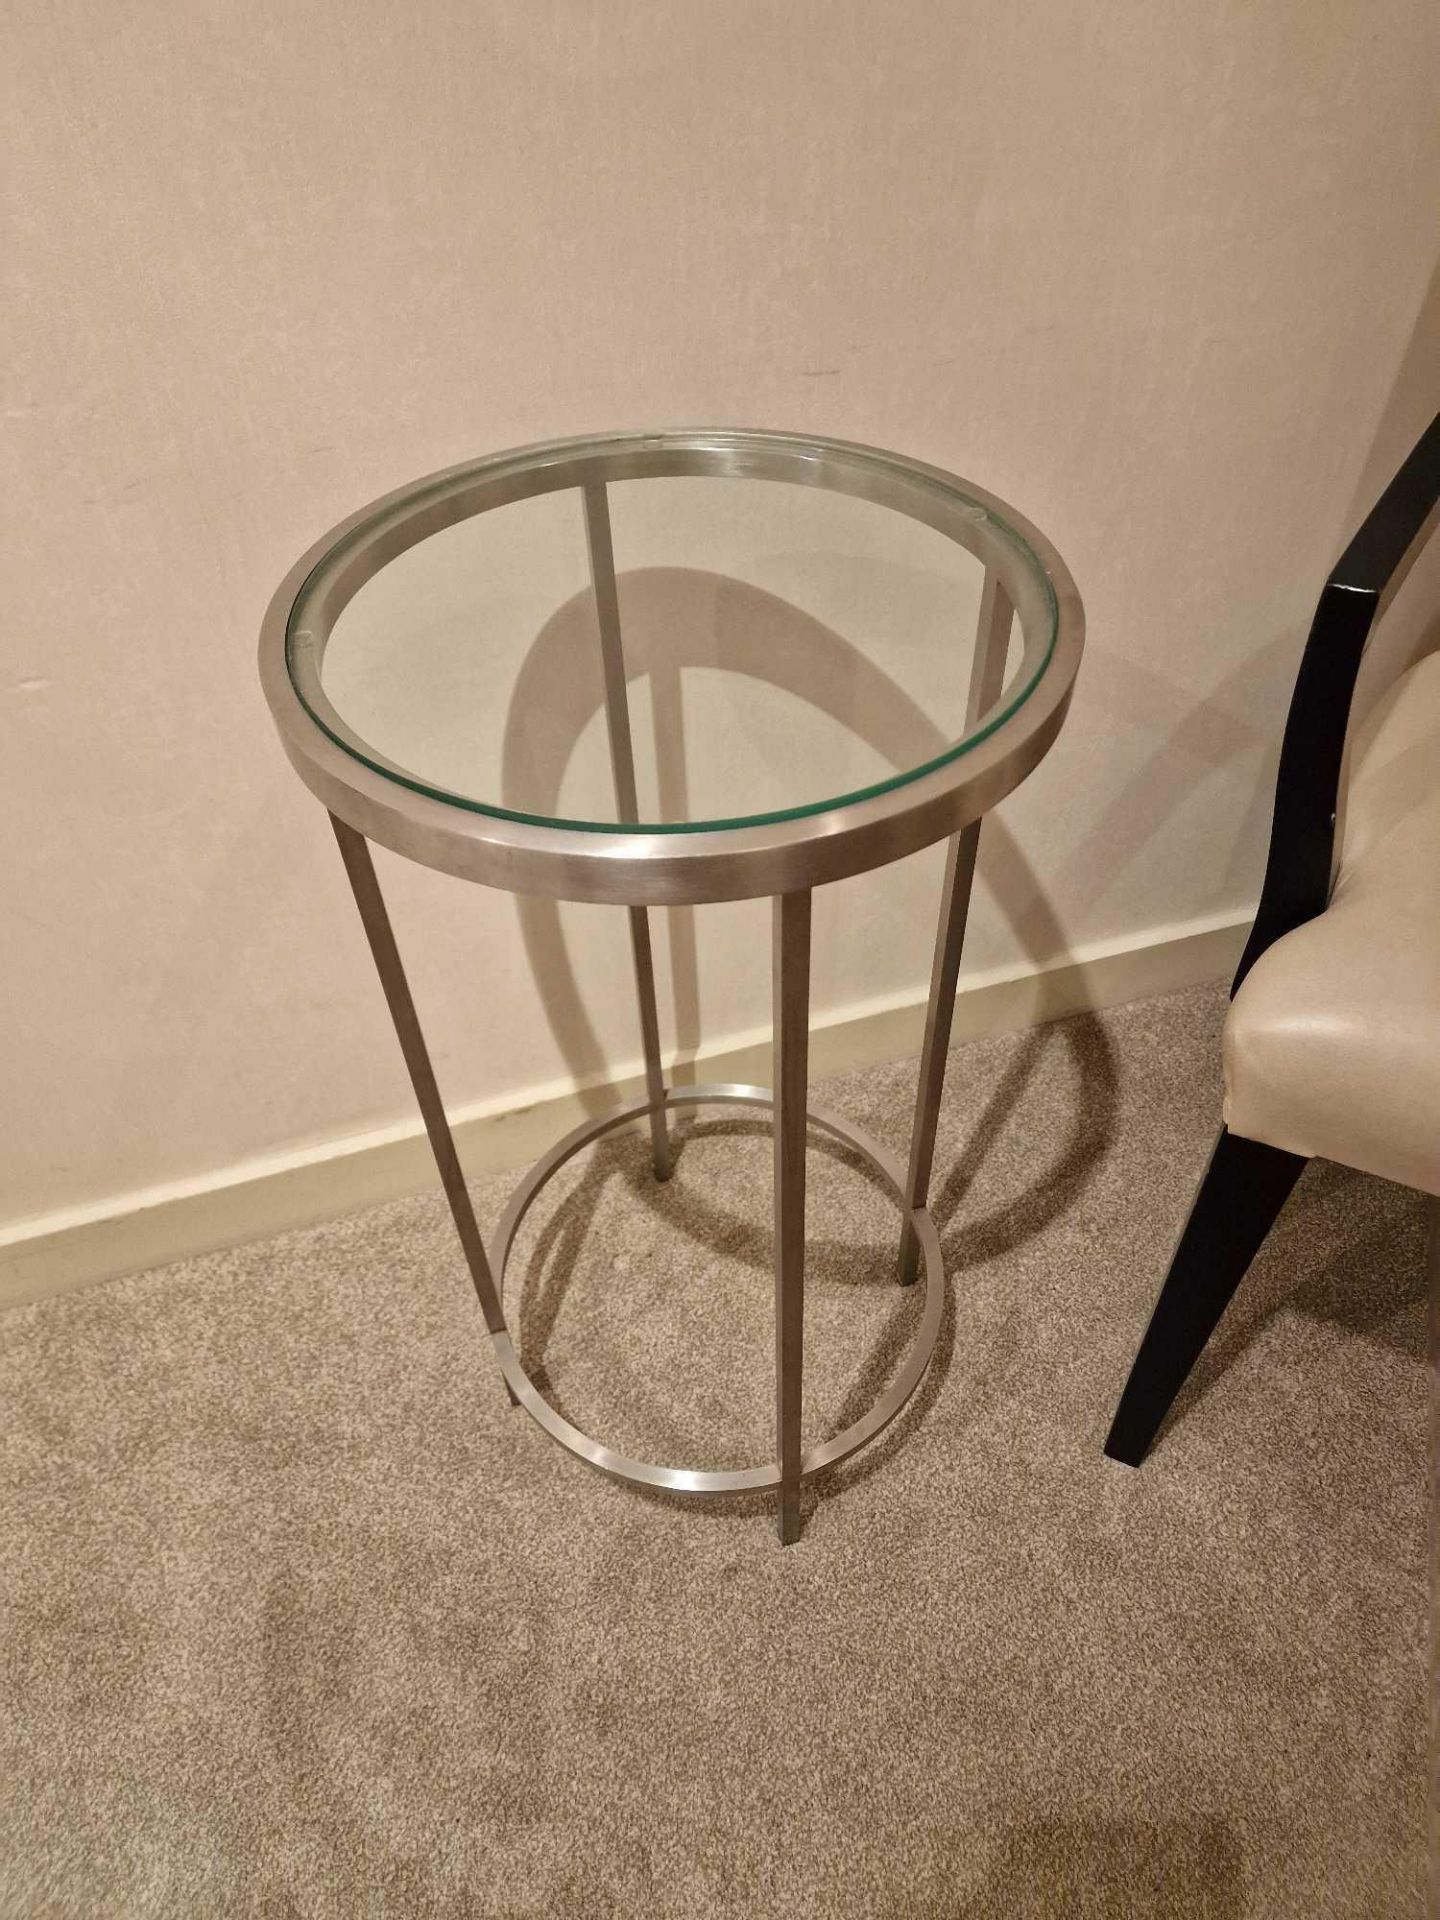 A Modern Design Stainless Steel And Tempered Glass Side Table 35cm Diameter x 64cm Tall - Image 2 of 3